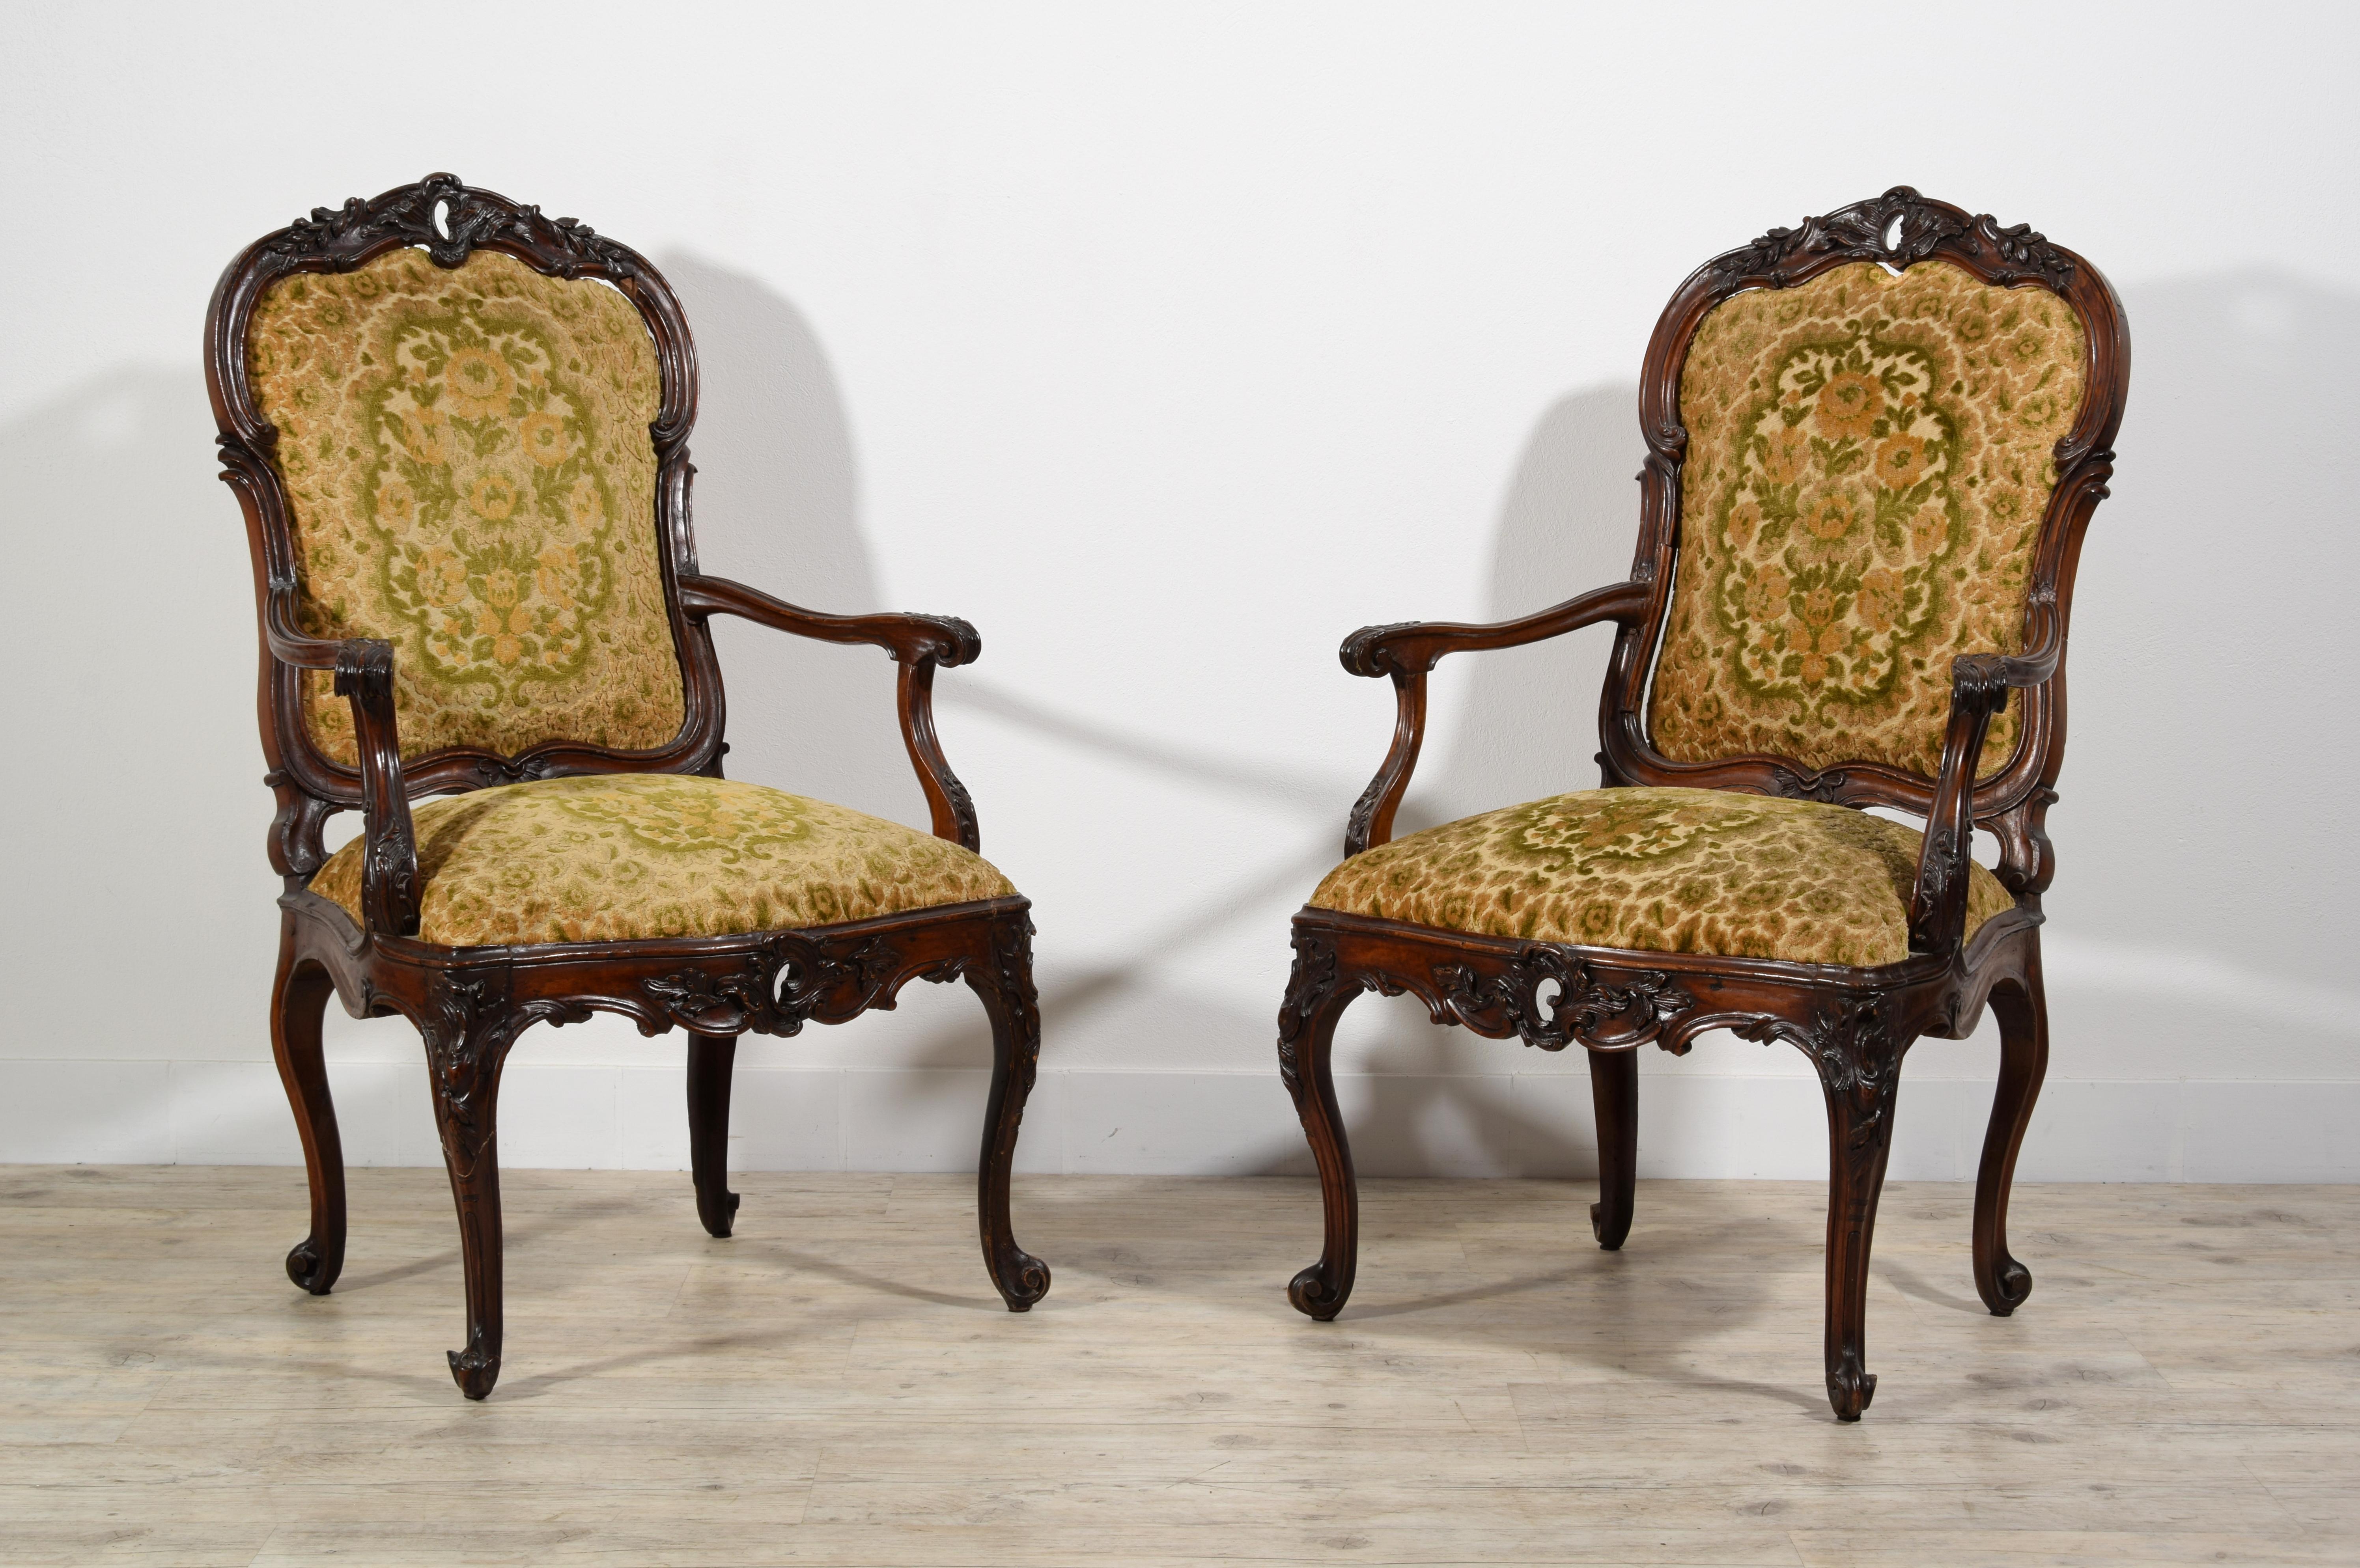 18th century, pair of Italian wood armchairs

This fine pair of armchairs was made in Lombardy, Itay, around the middle of the eighteenth century. In carved walnut wood, they have a mixed and wavy plant characteristic of the Lombard baroque. The